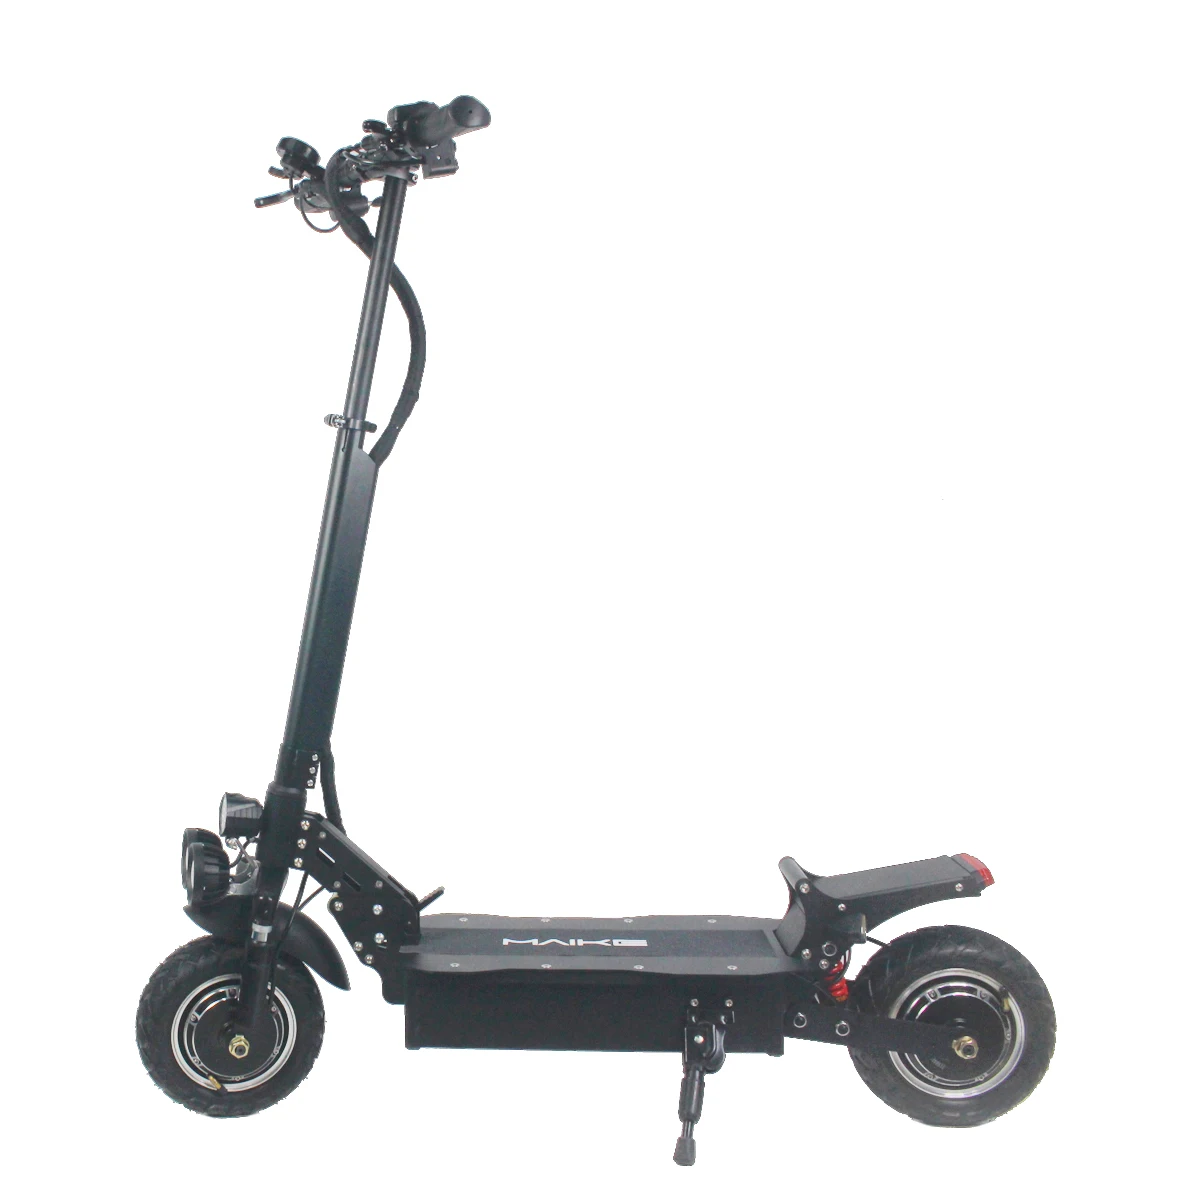 

China Suppliers Maike mk6 10 inch two wheel 1000w 2000w powerful foldable off road electric kick scooter adult